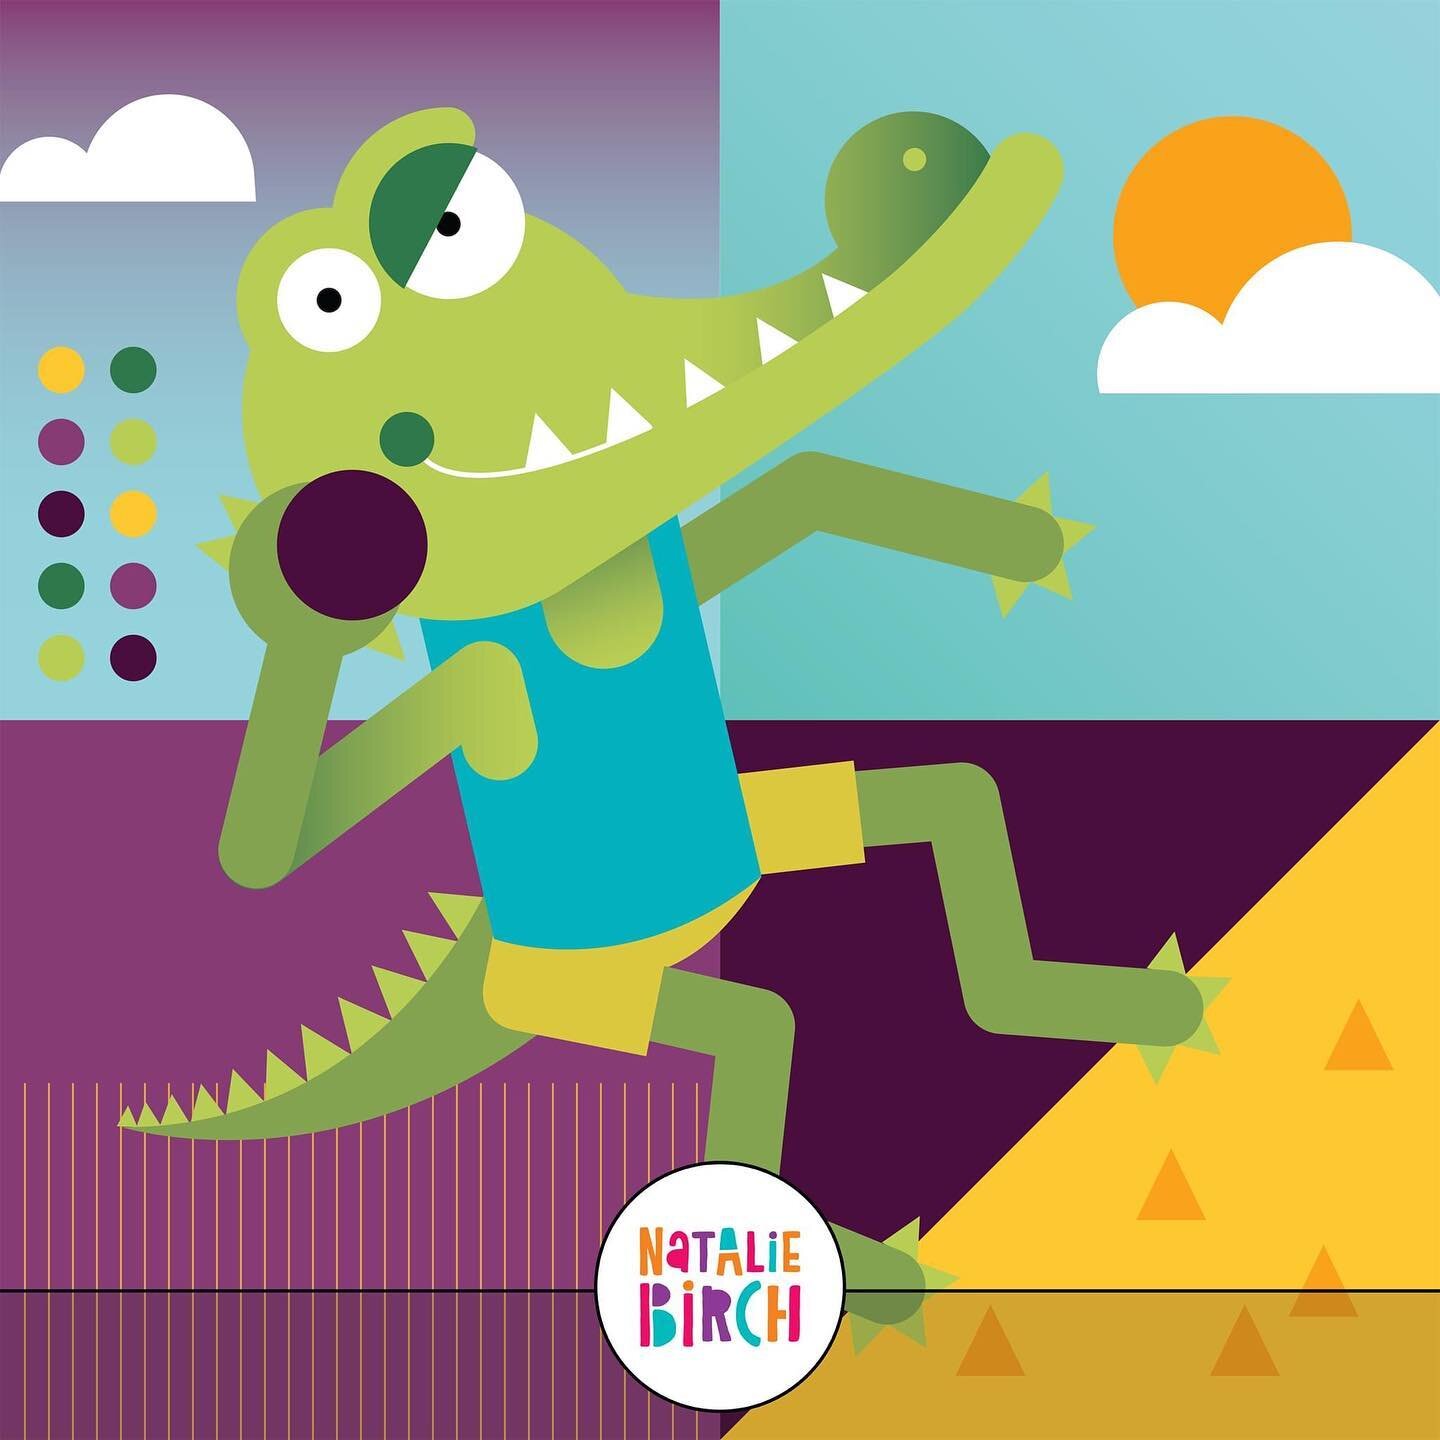 &ldquo;Crocput&rdquo;
A reptilian bloke doing shot put!
Suggested by @effieploudias 🐊 ⚫️

#illustration
#illustrationartists
#illustrationart
#australianartist
#australianillustrator
#designandillustration
#childrensillustration #earlychildhoodeduca